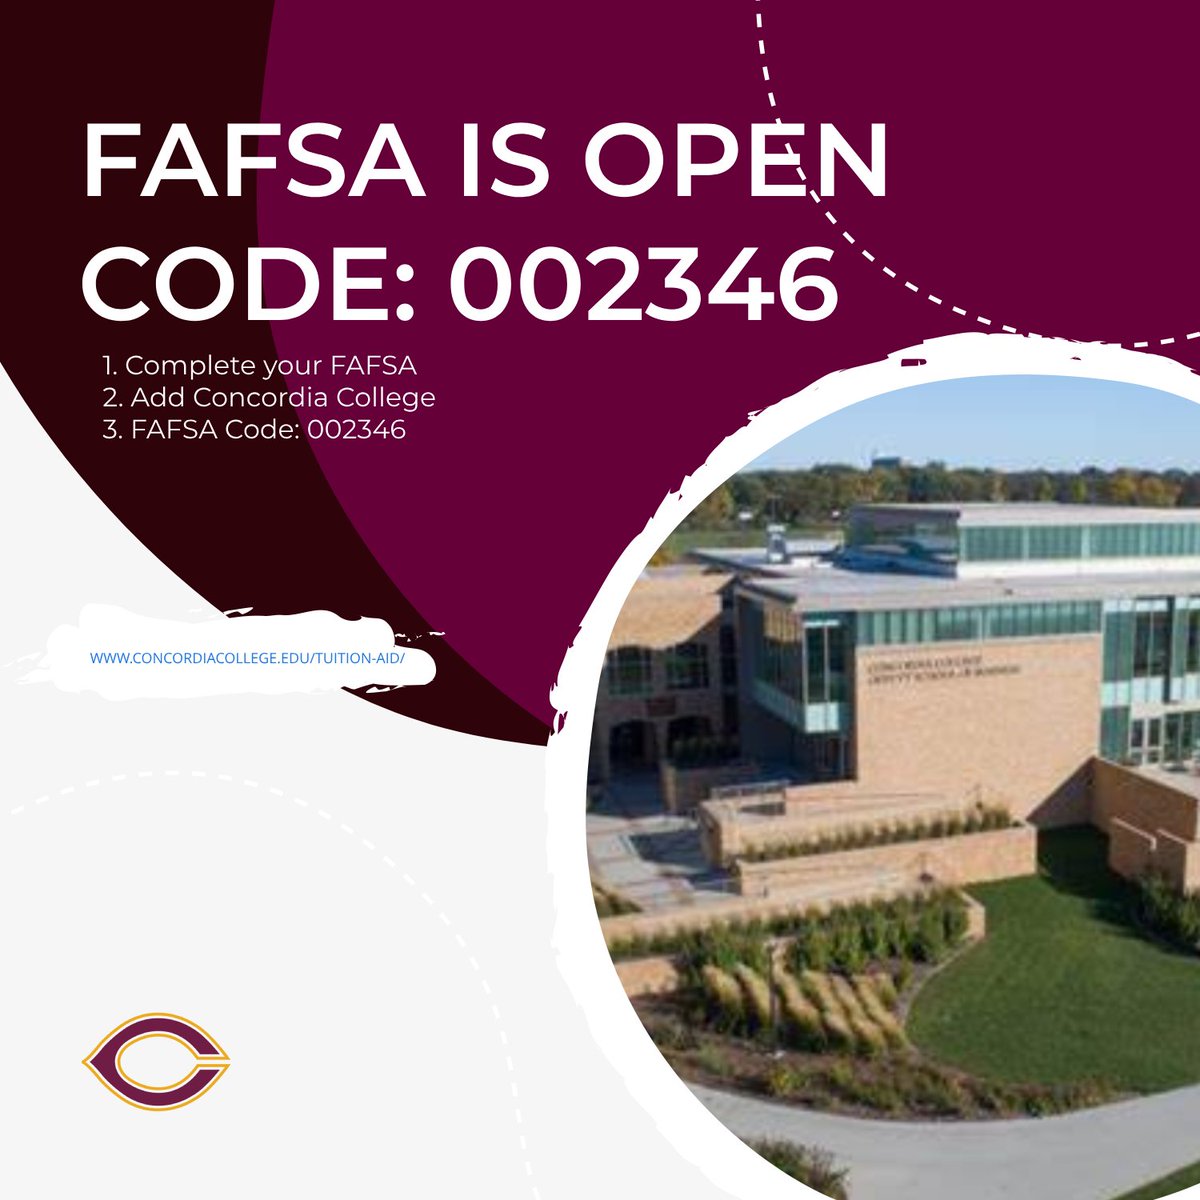 FAFSA is open! 1. Complete your FAFSA today! 2. Add Concordia College w/code 002346 Make an INFORMED decision. concordiacollege.edu/tuition-aid/